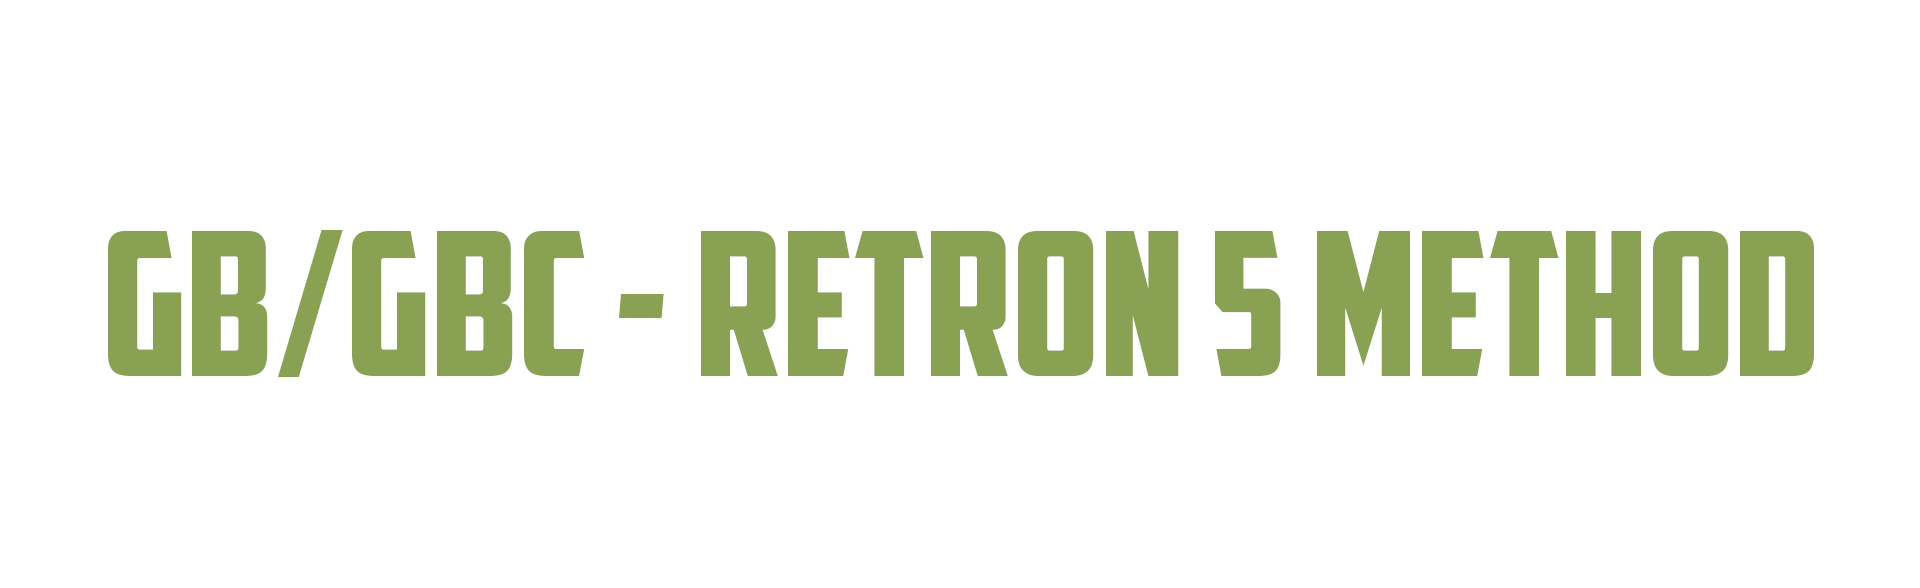 More information about "Using The Retron 5"